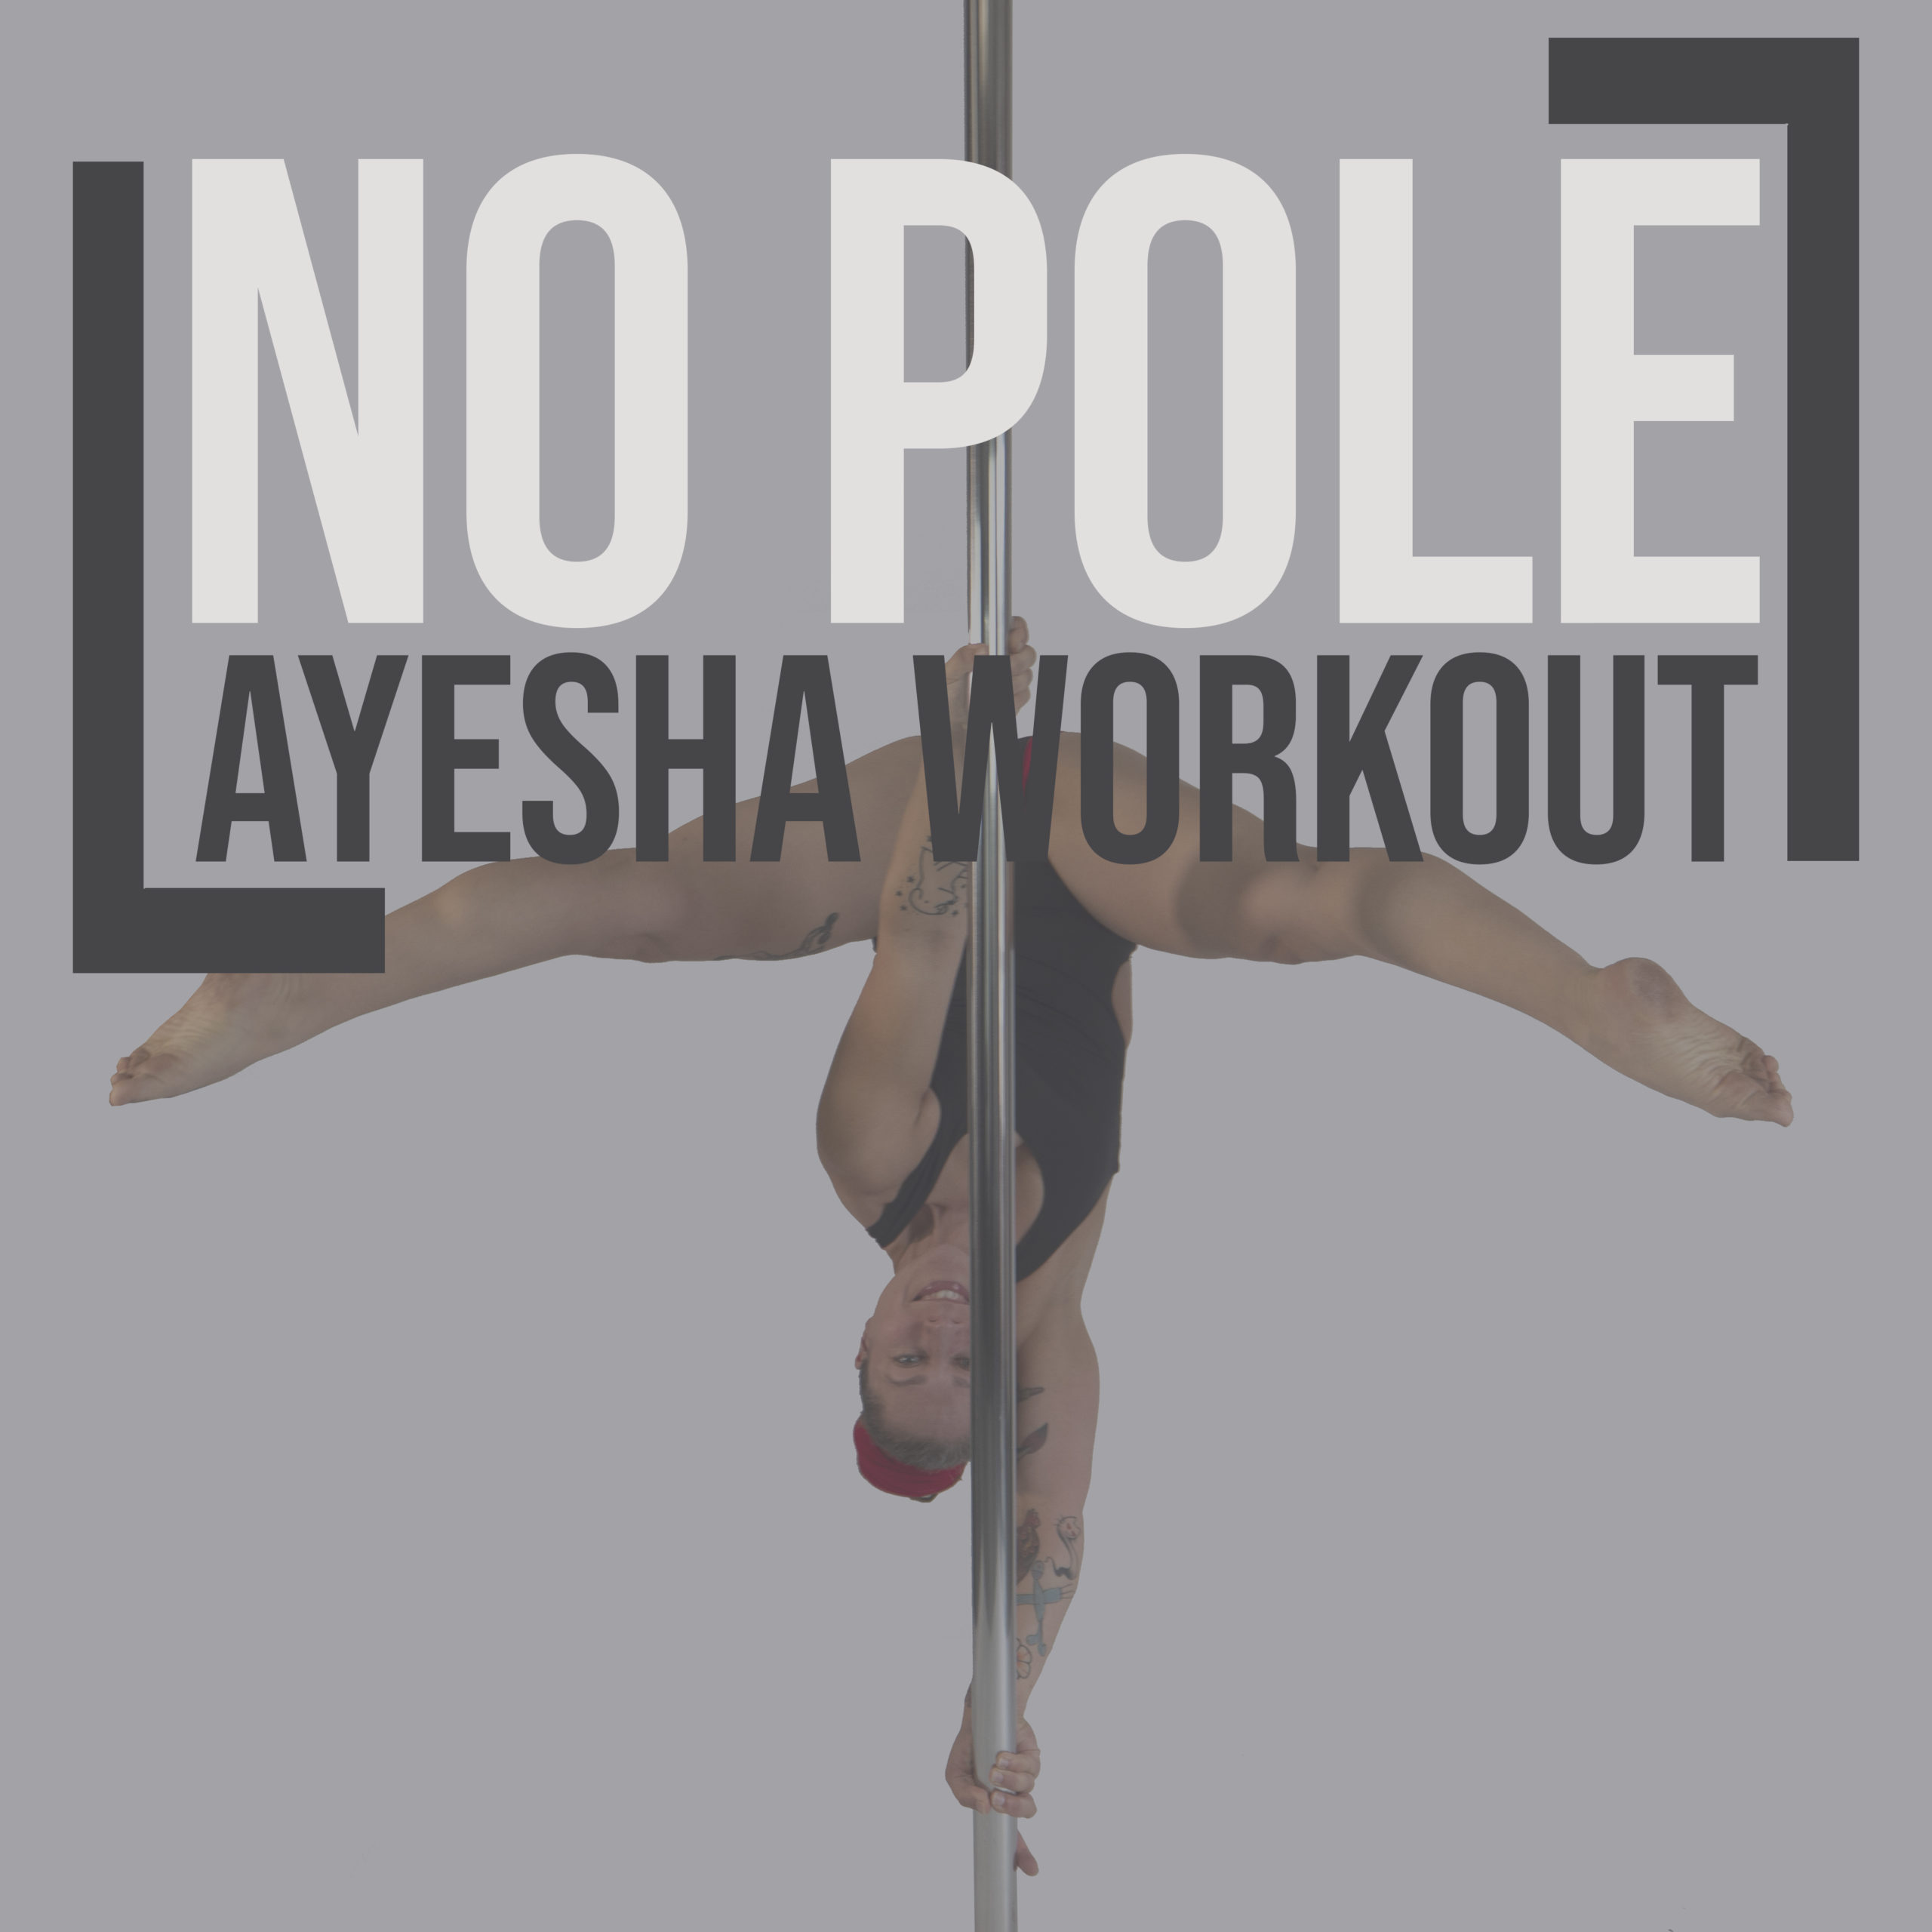 Pro Grip Tricks to Keep Your Body on The Pole